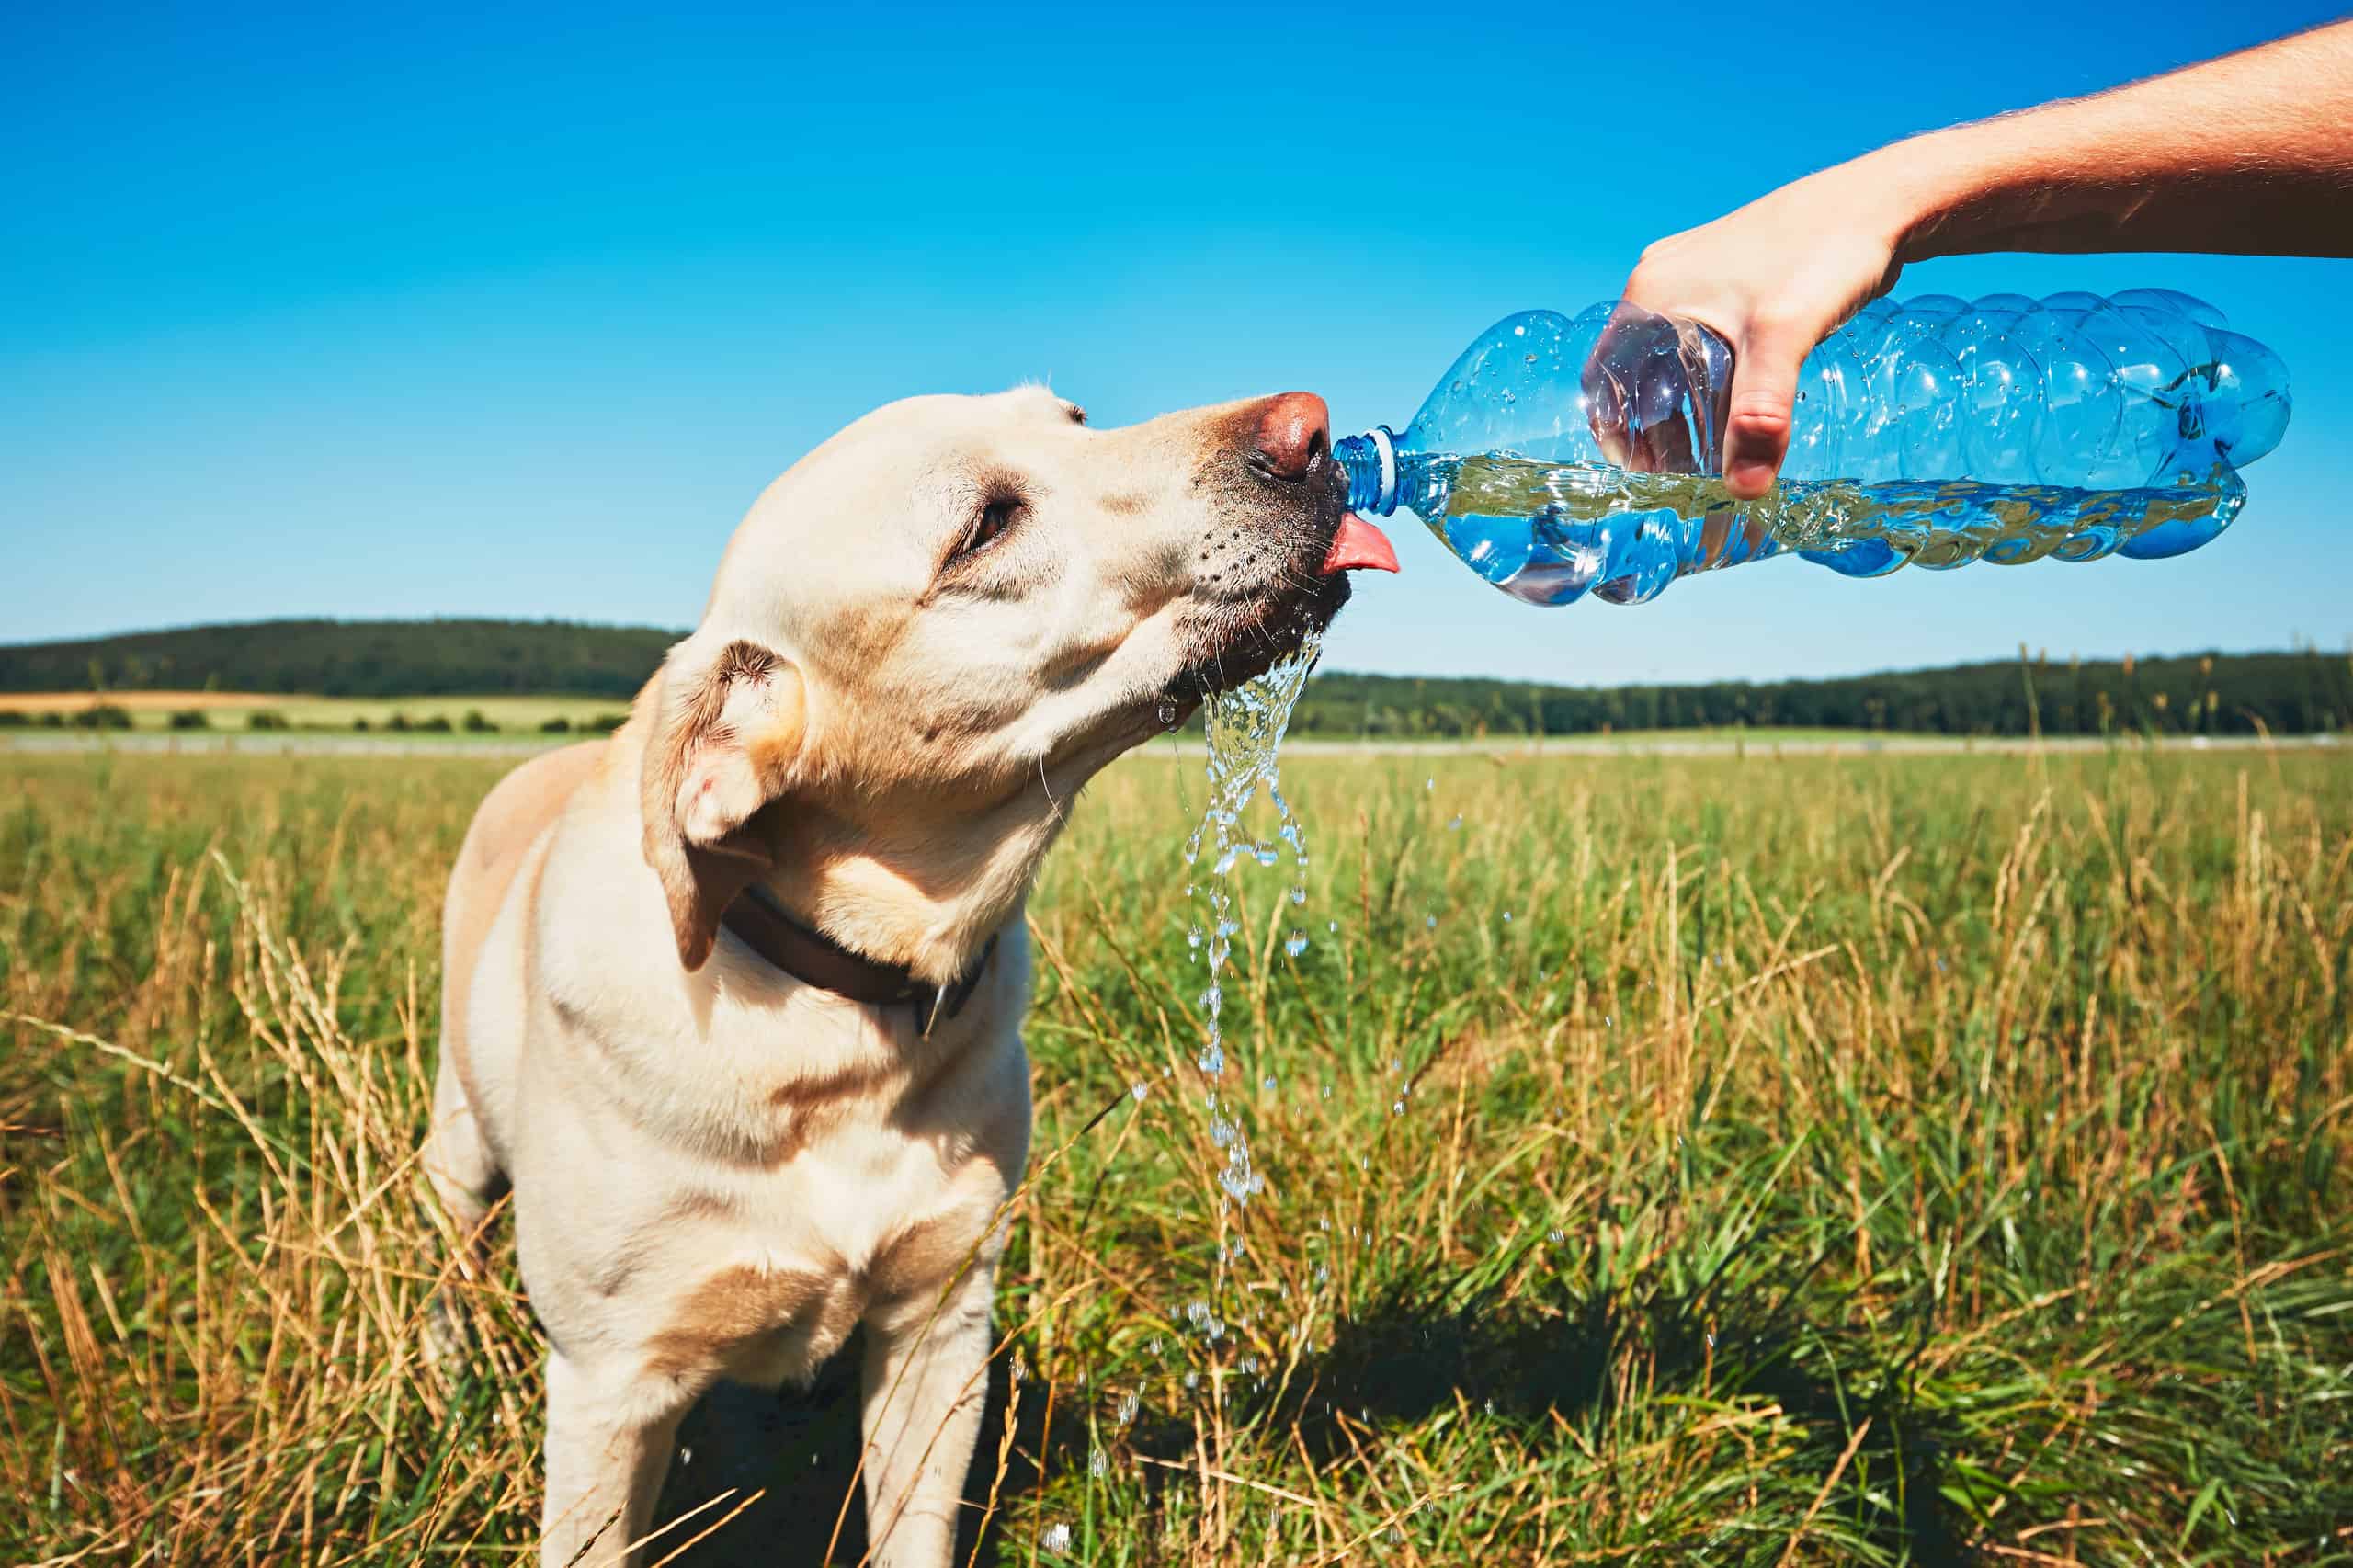 Dog drinking water from bottle